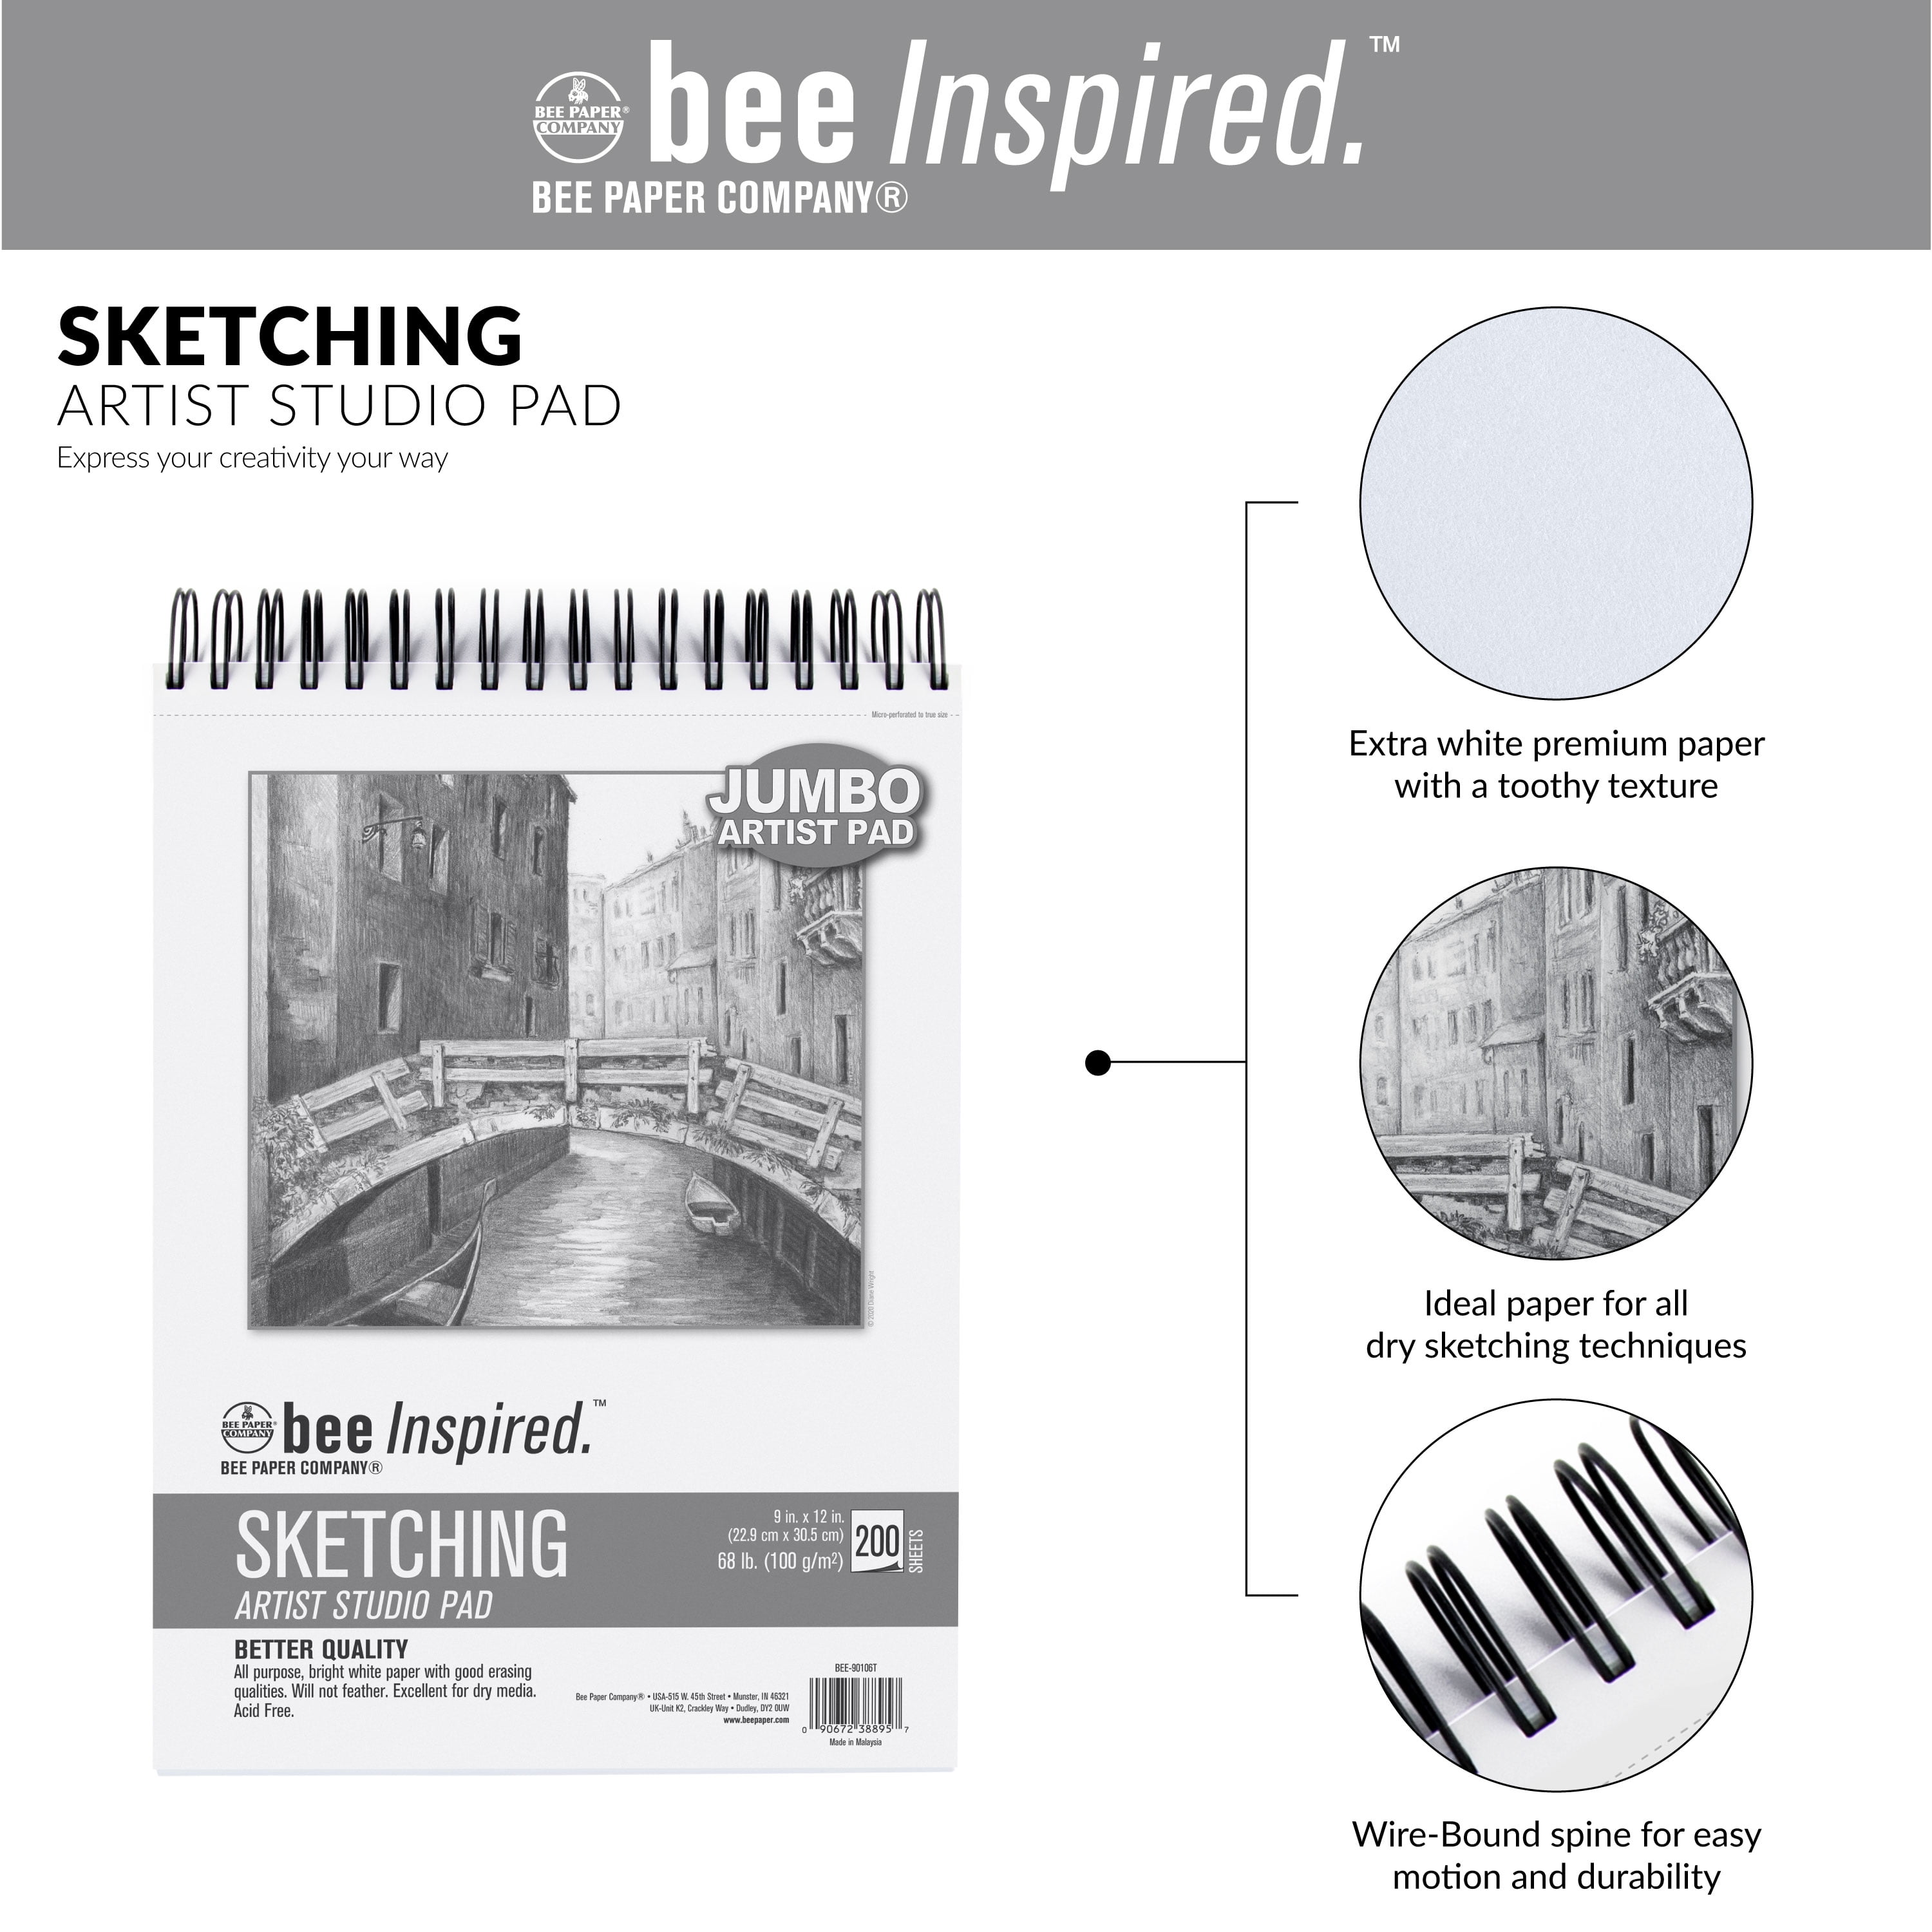 Bee Paper - 9 x 12 Studio Artist Drawing Pad, Spiral Bound, 150 Sheets,  74 lb. 120 GSM Paper